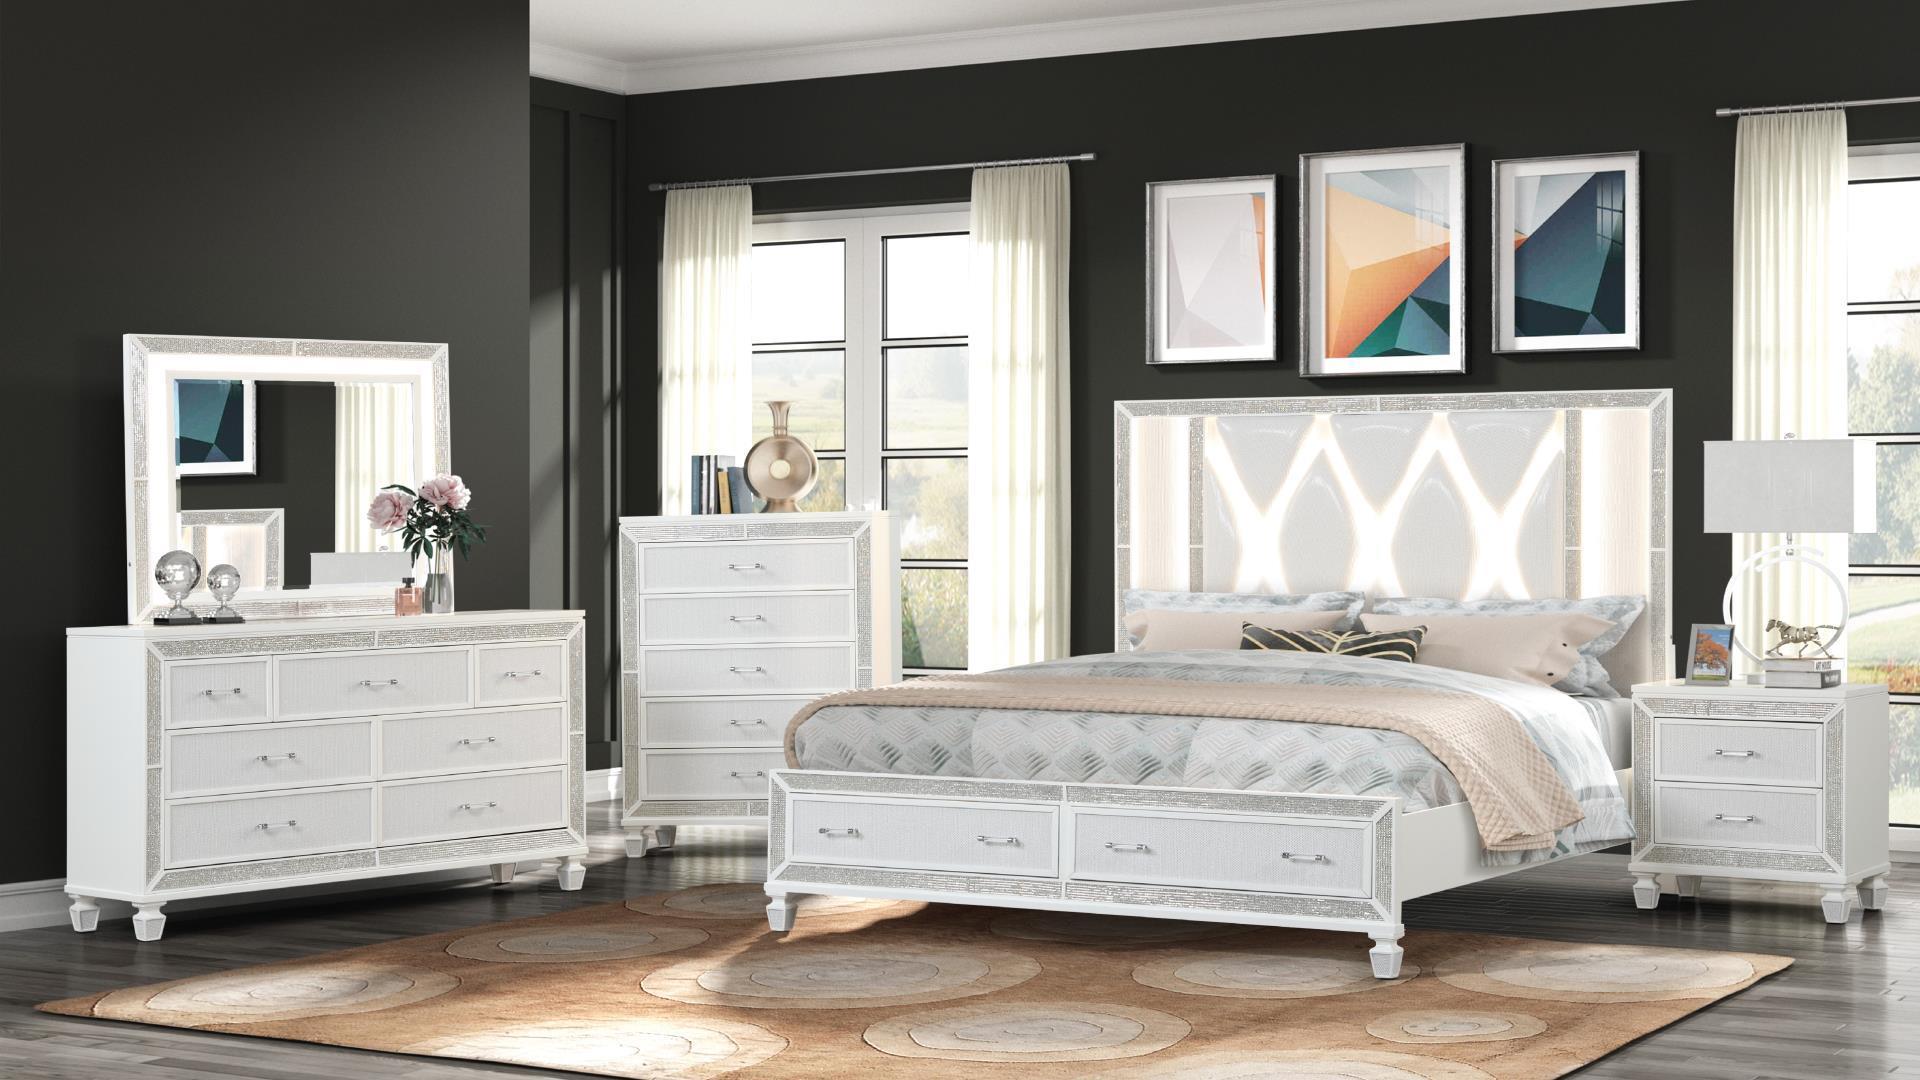 

    
Glam White Solid Wood Queen Bed Set 5Pcs CRYSTAL Galaxy Home Modern Contemporary
